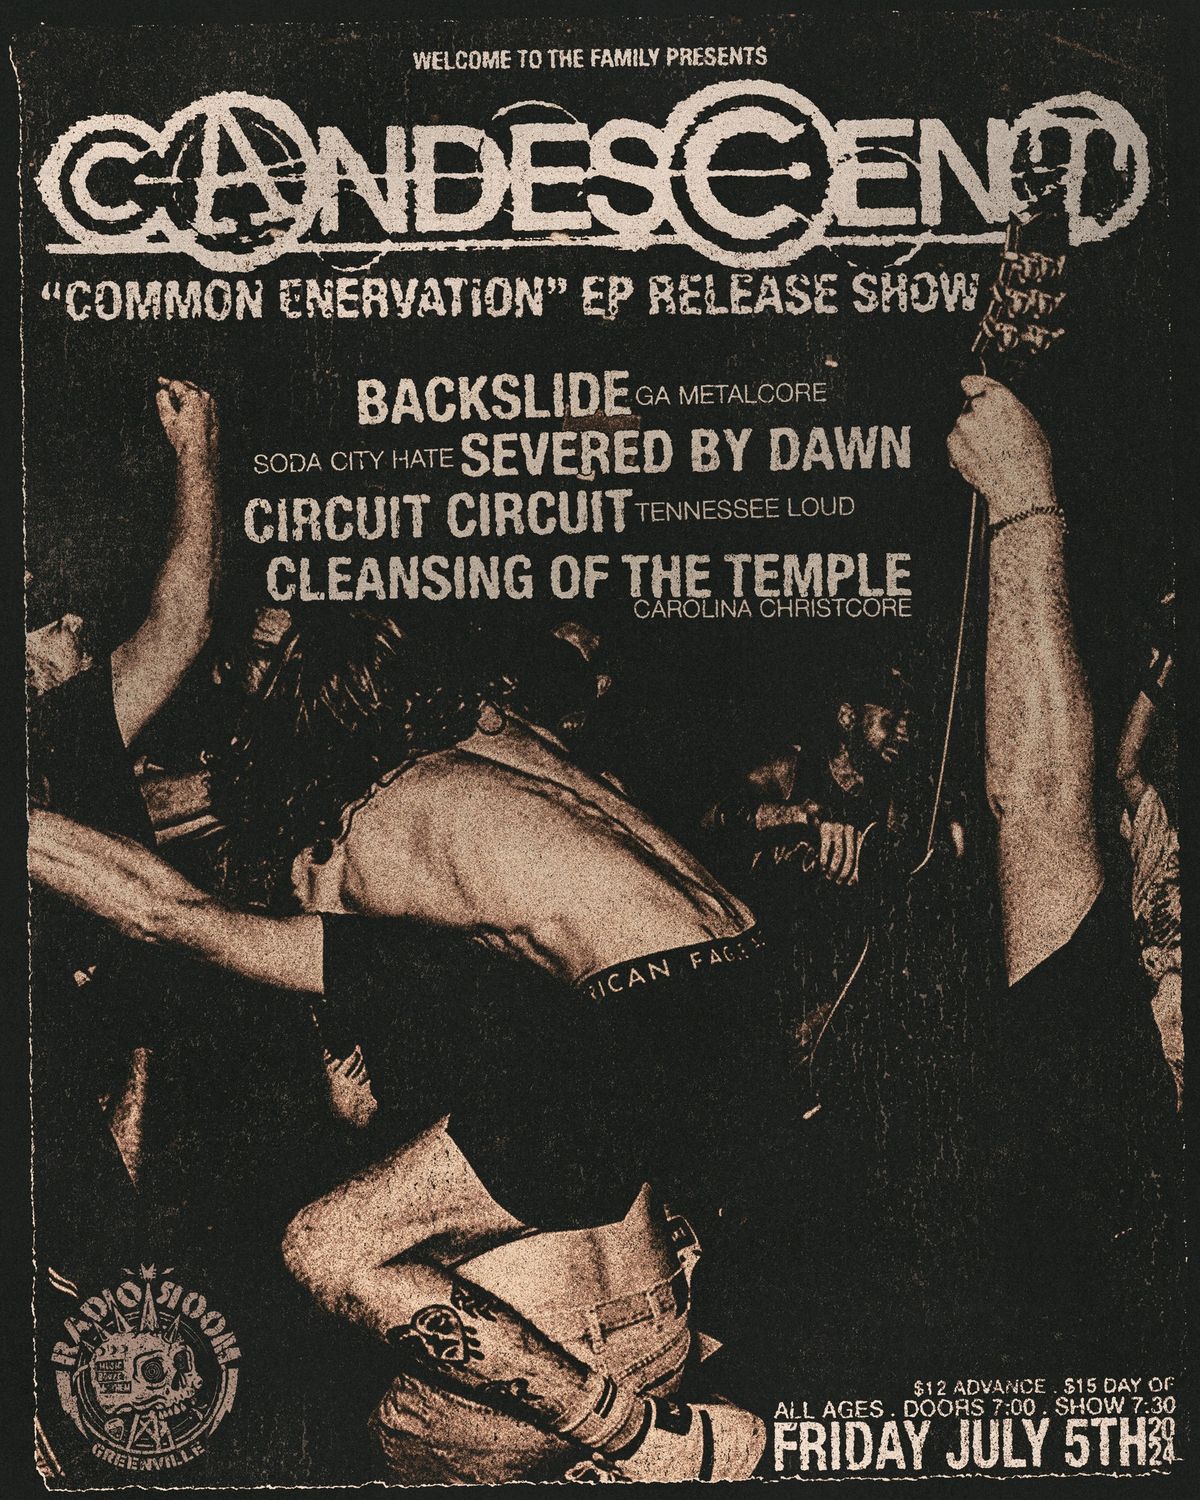 WTTF Presents: Candescent EP Release show at Radio Room